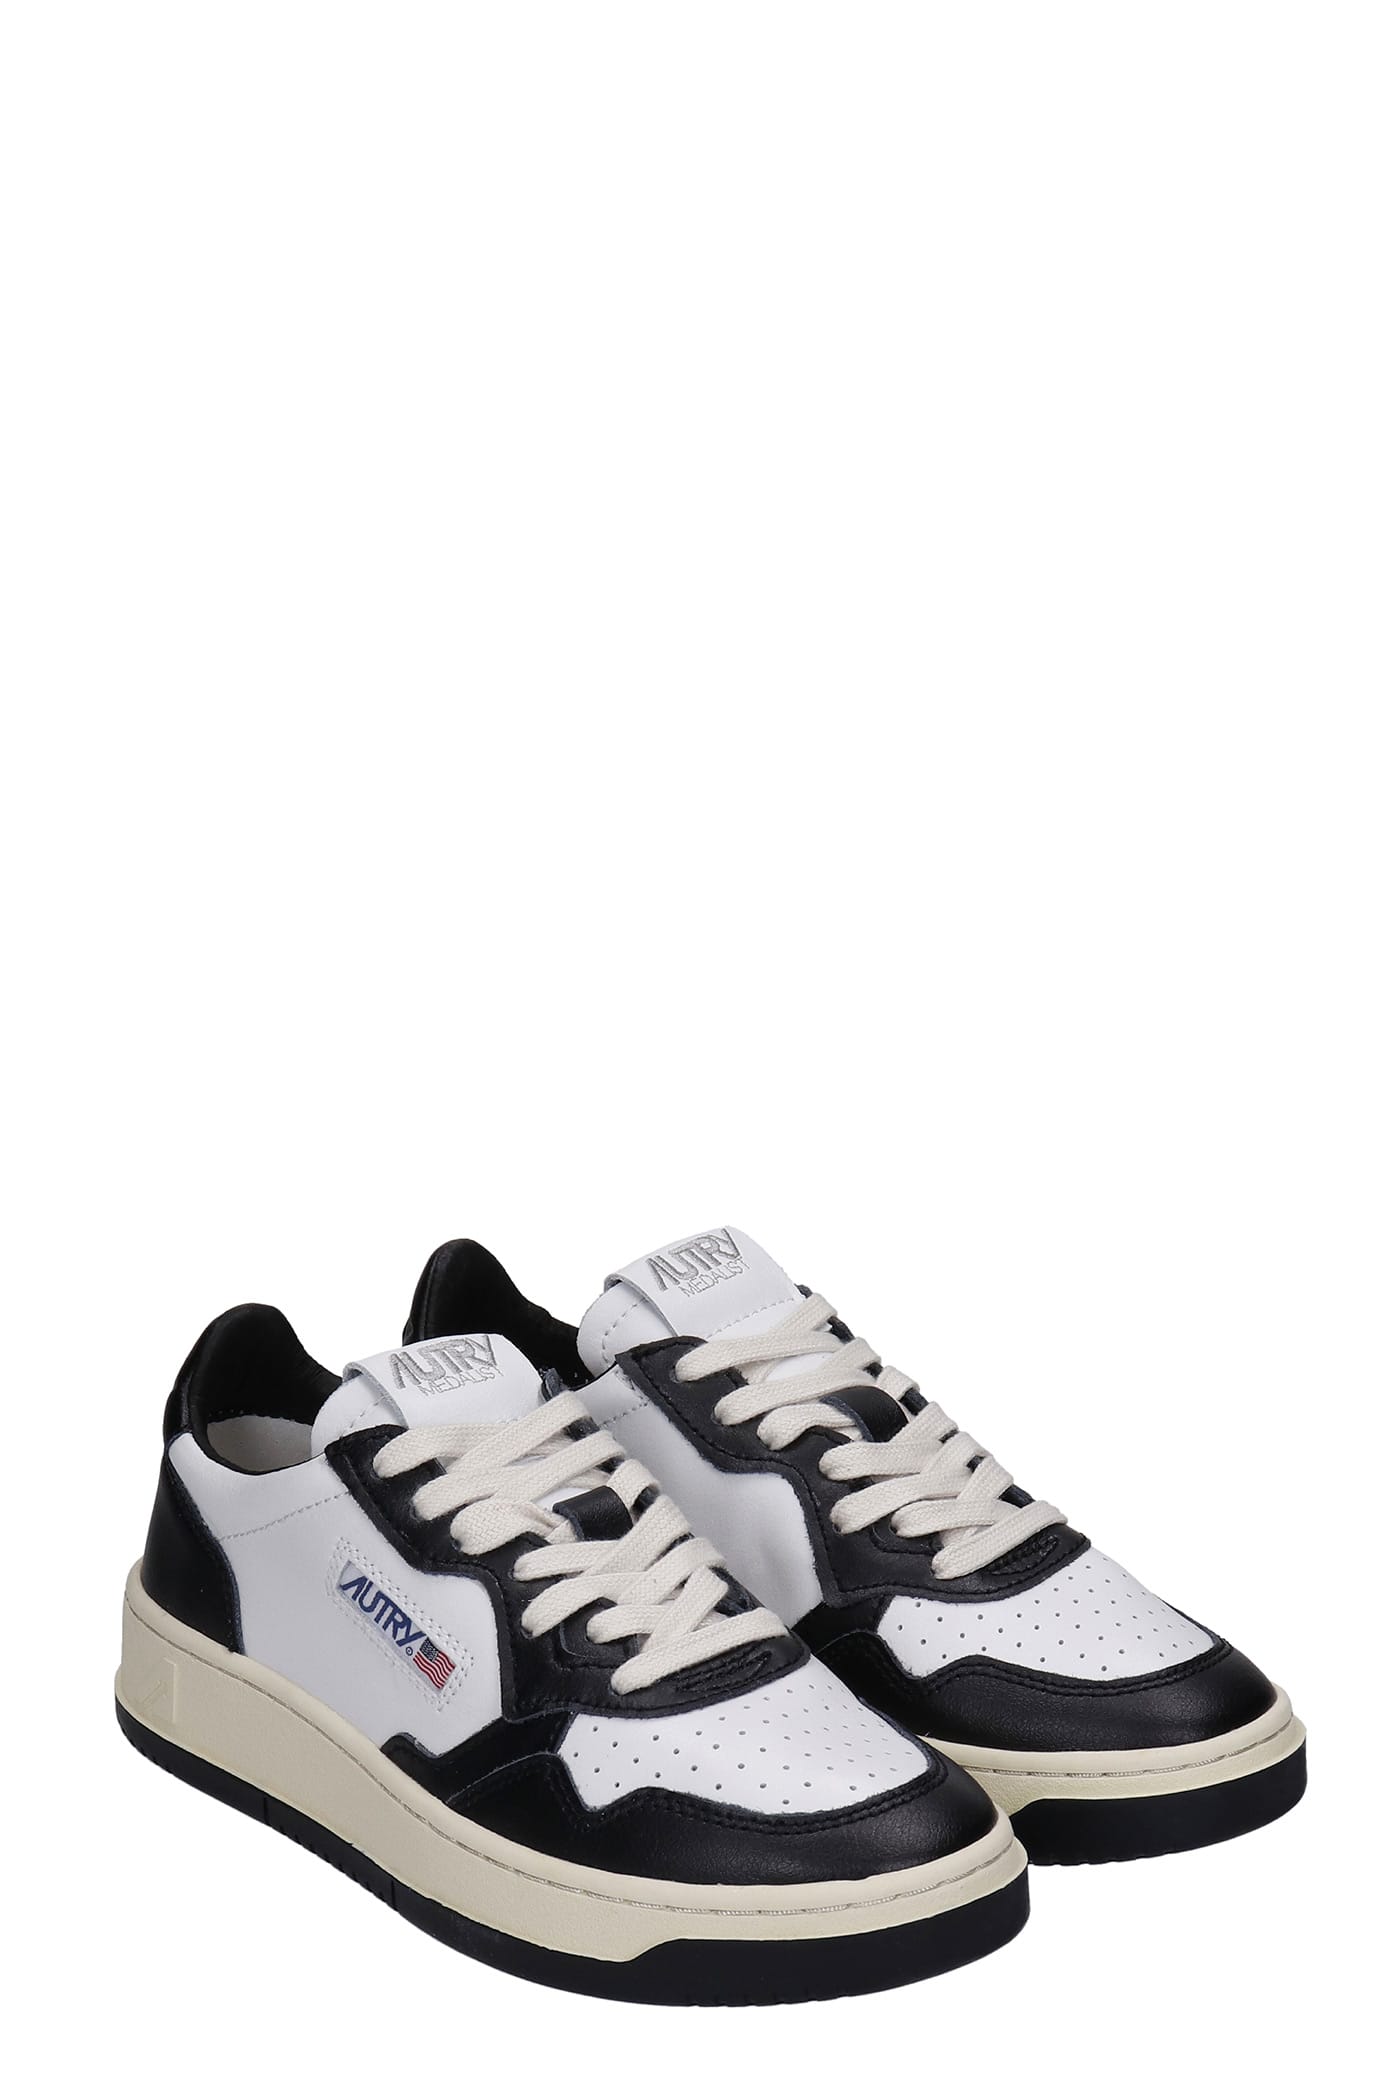 Shop Autry 01 Sneakers In White Leather In Black/white